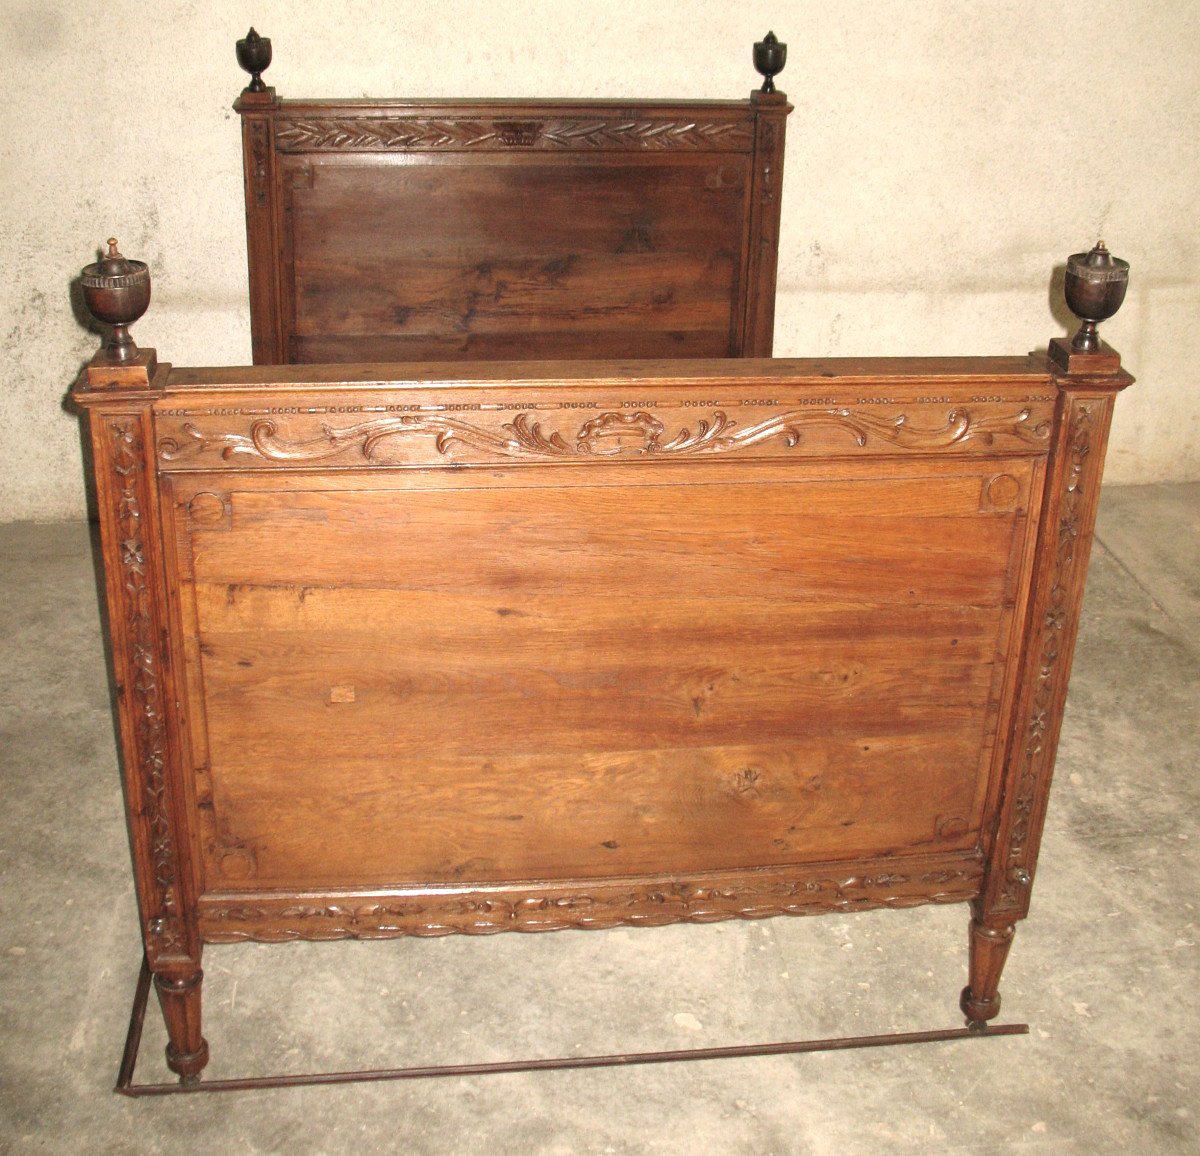 Carved Oak Alcove Bed From The Late 18th Century, Complete With Rails And Casters-photo-2